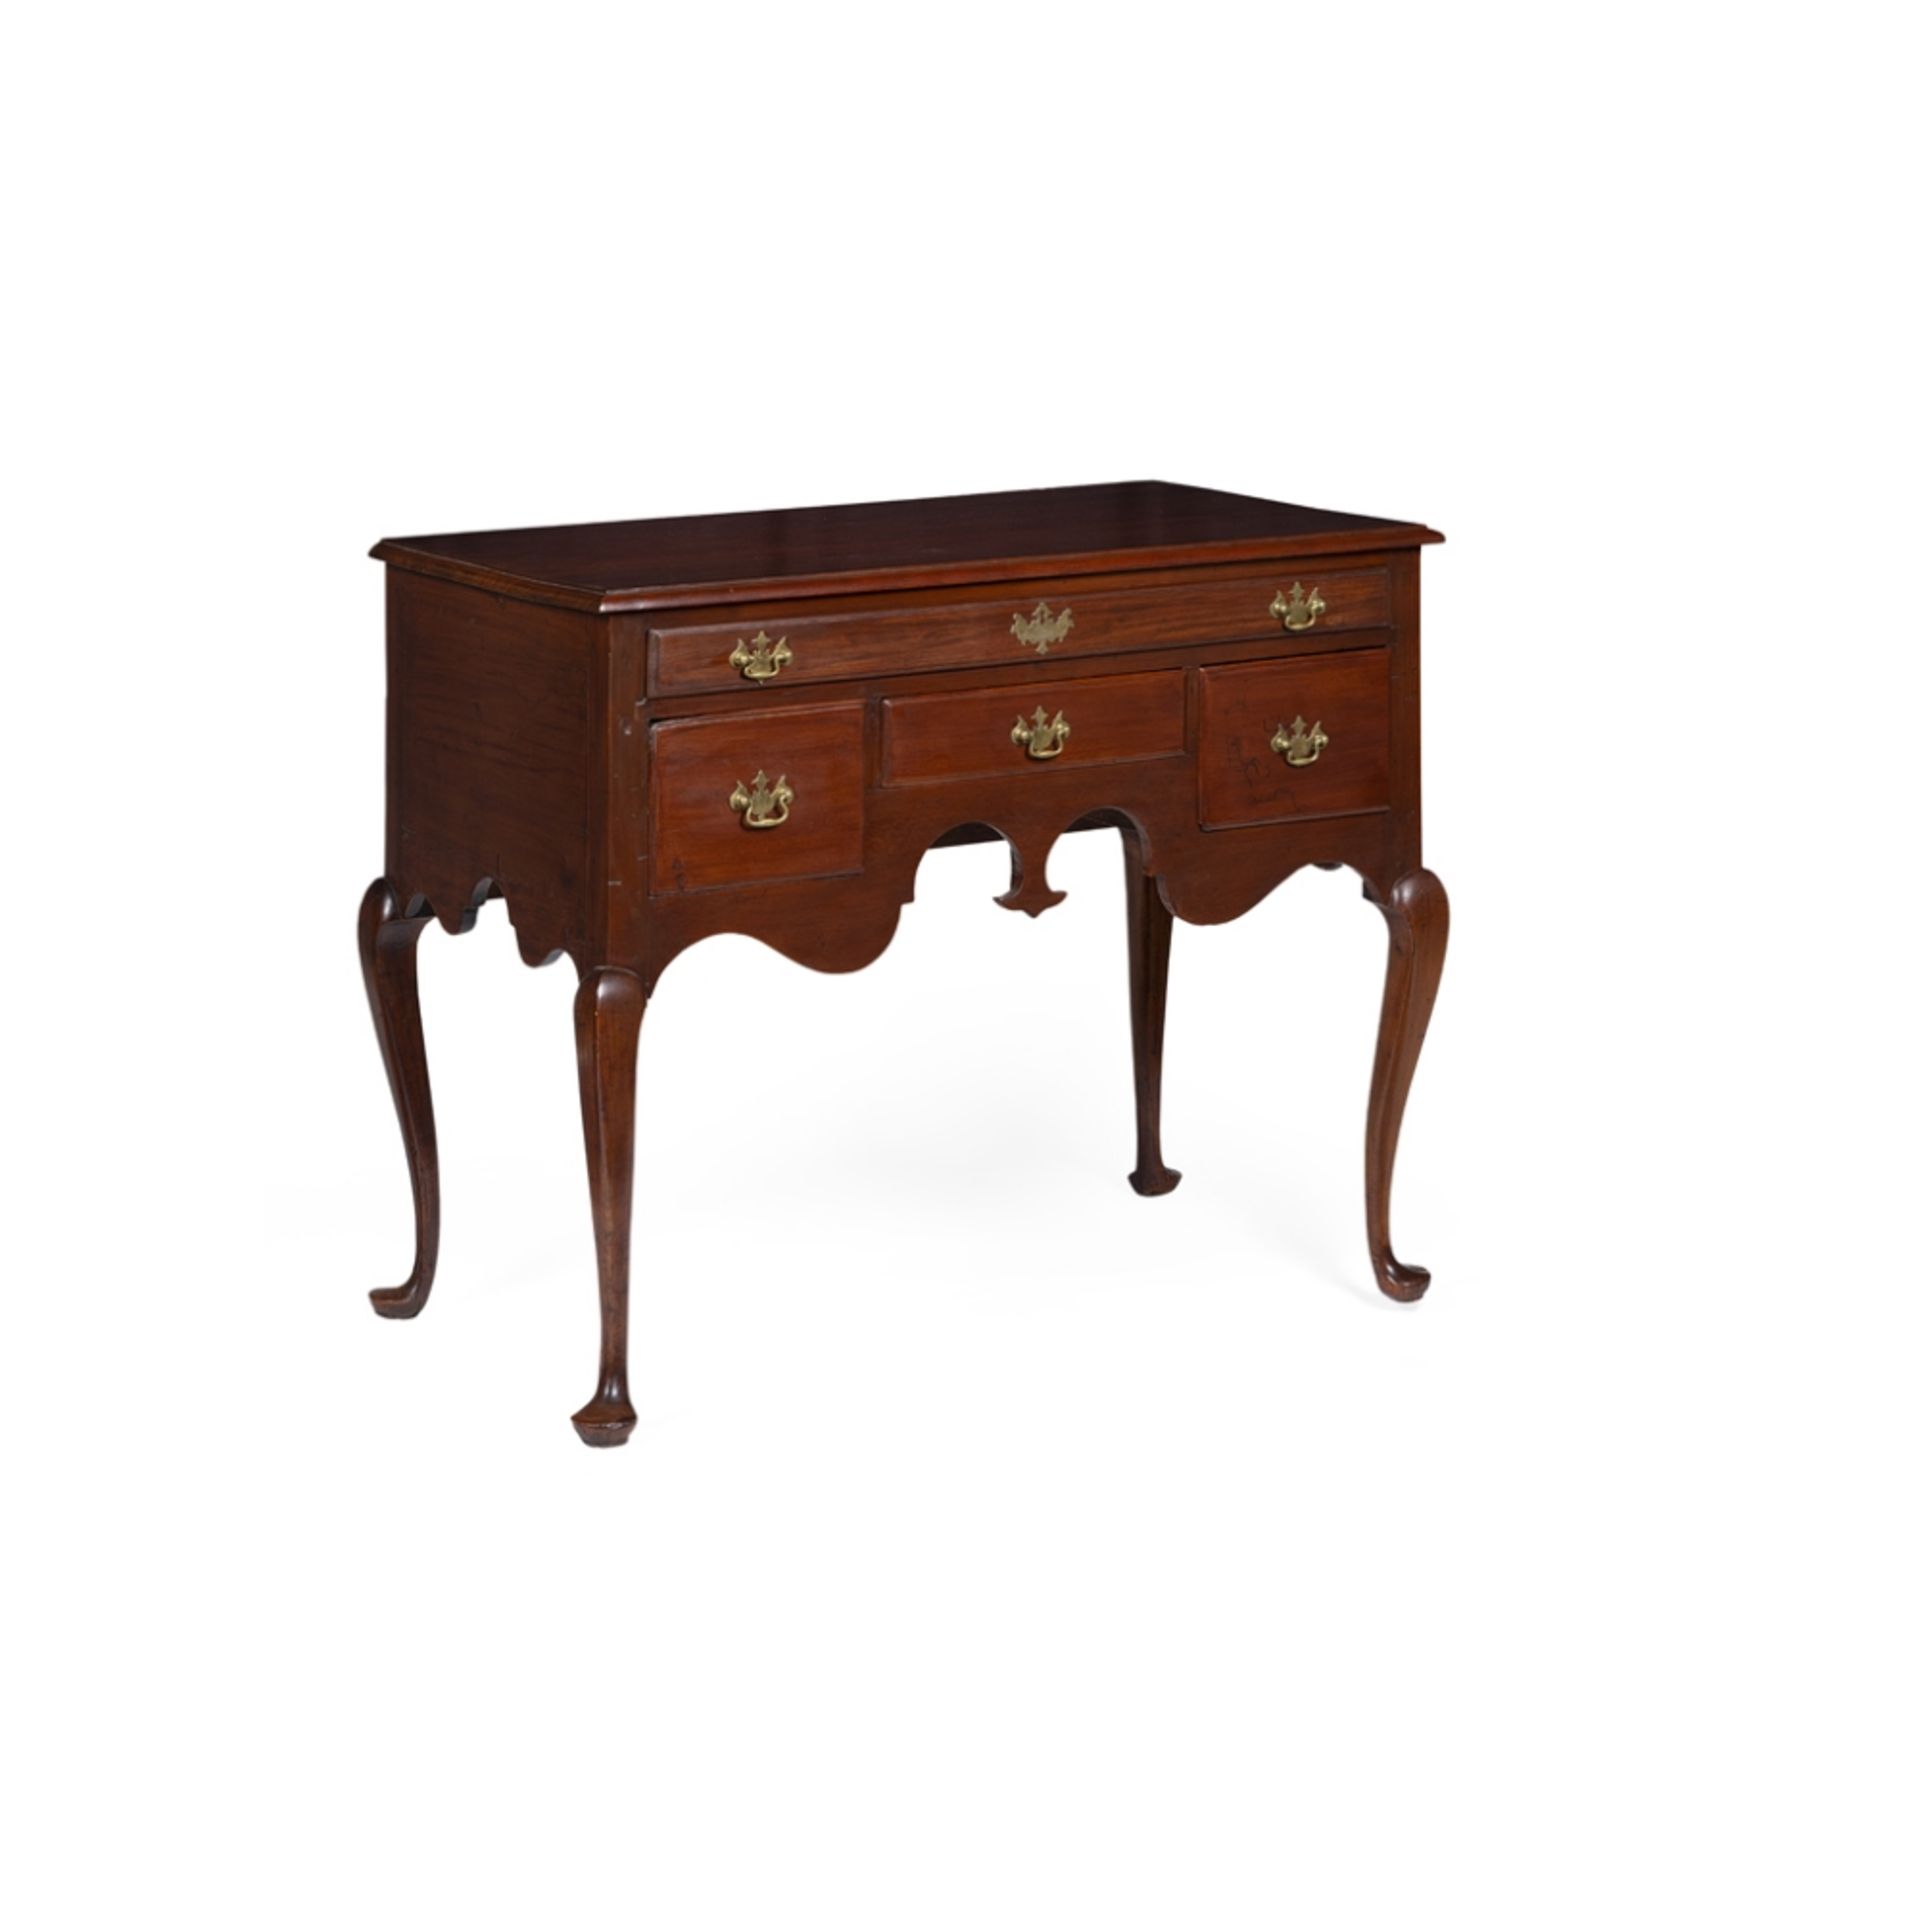 GEORGE II MAPLE LOWBOY, POSSIBLY AMERICAN2ND QUARTER 18TH CENTURY the rectangular top with a moulded